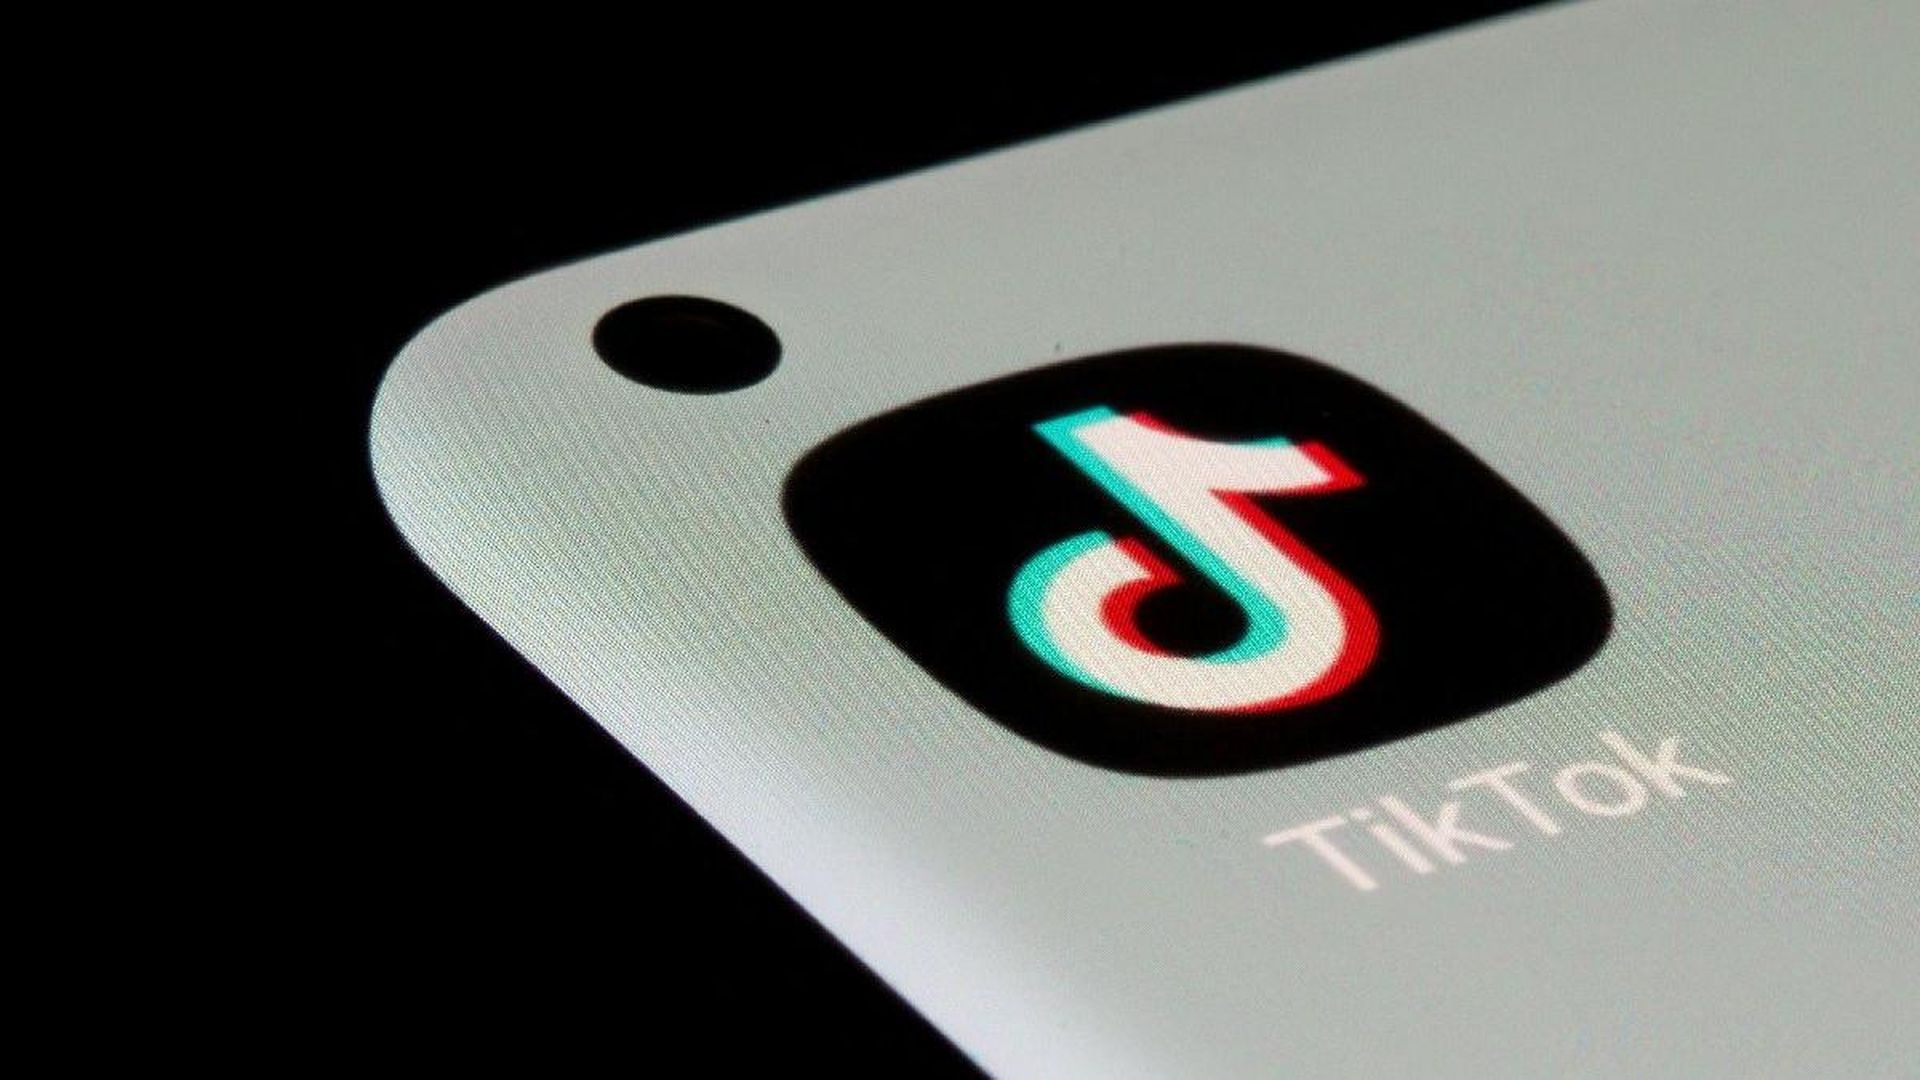 In this article, we are going to be going over how to unrepost a TikTok in 2022, so you can remove an unwanted repost from your page.